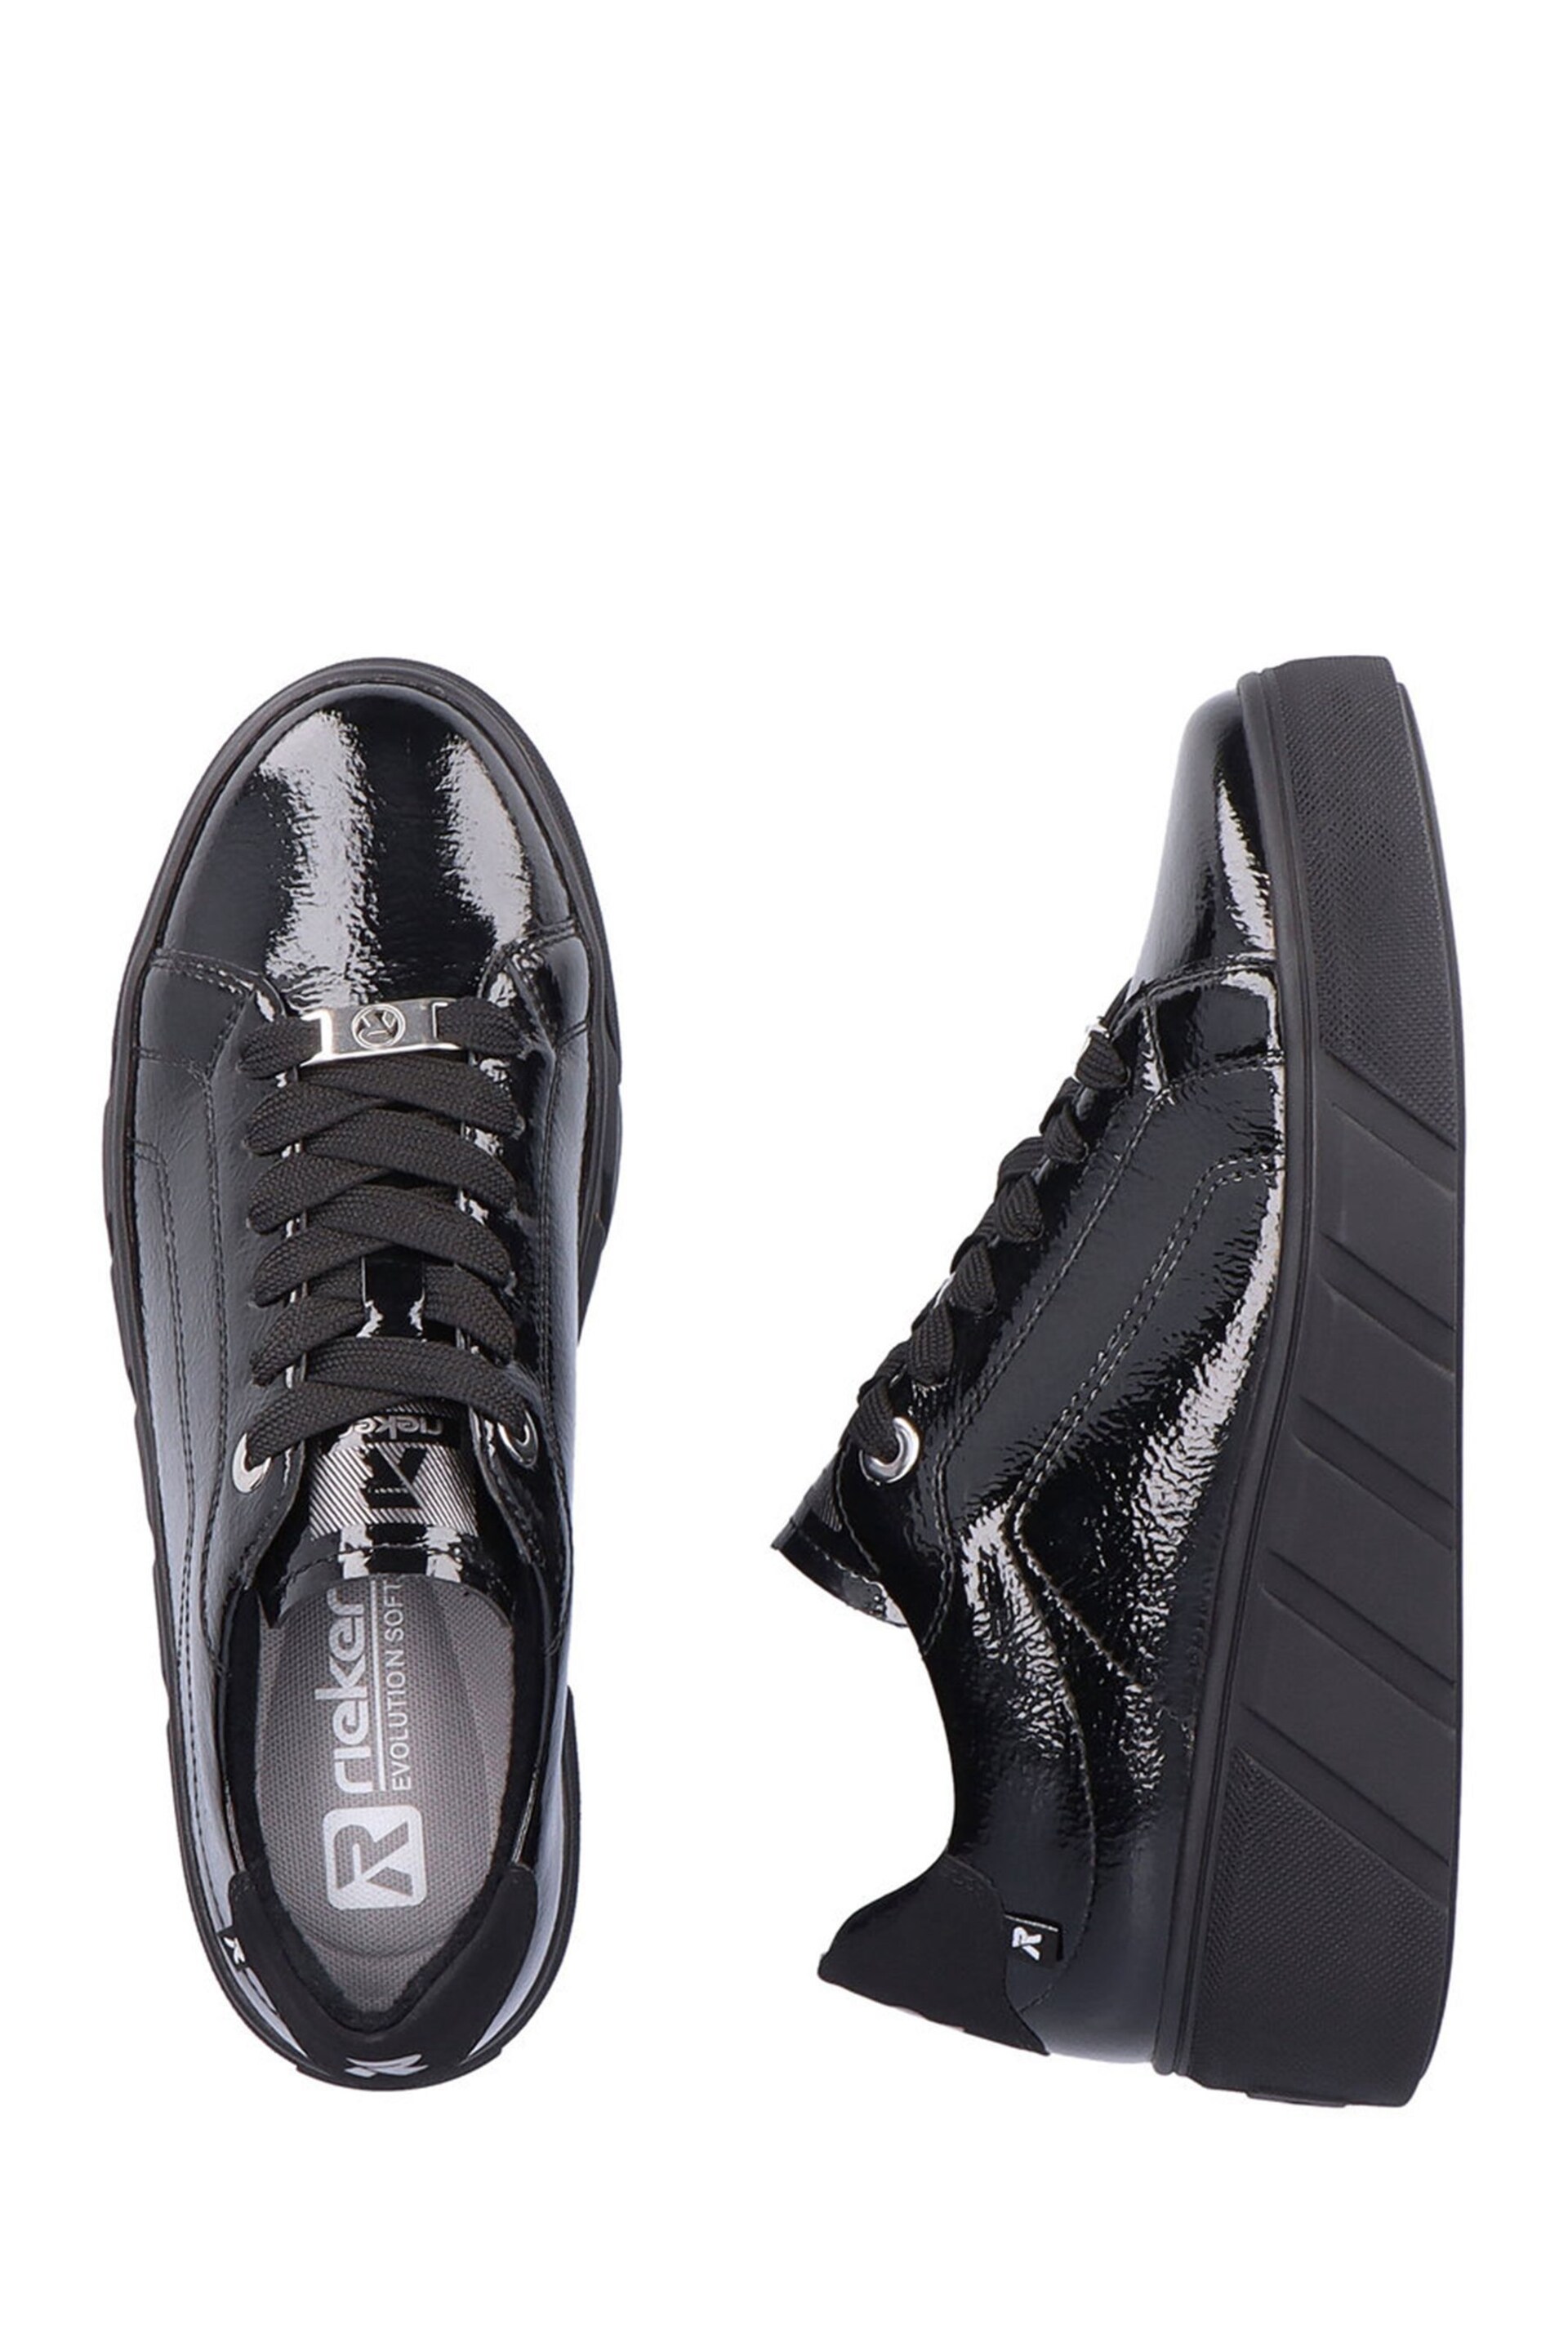 Rieker Womens Evolution Lace-Up Black Trainers - Image 9 of 11